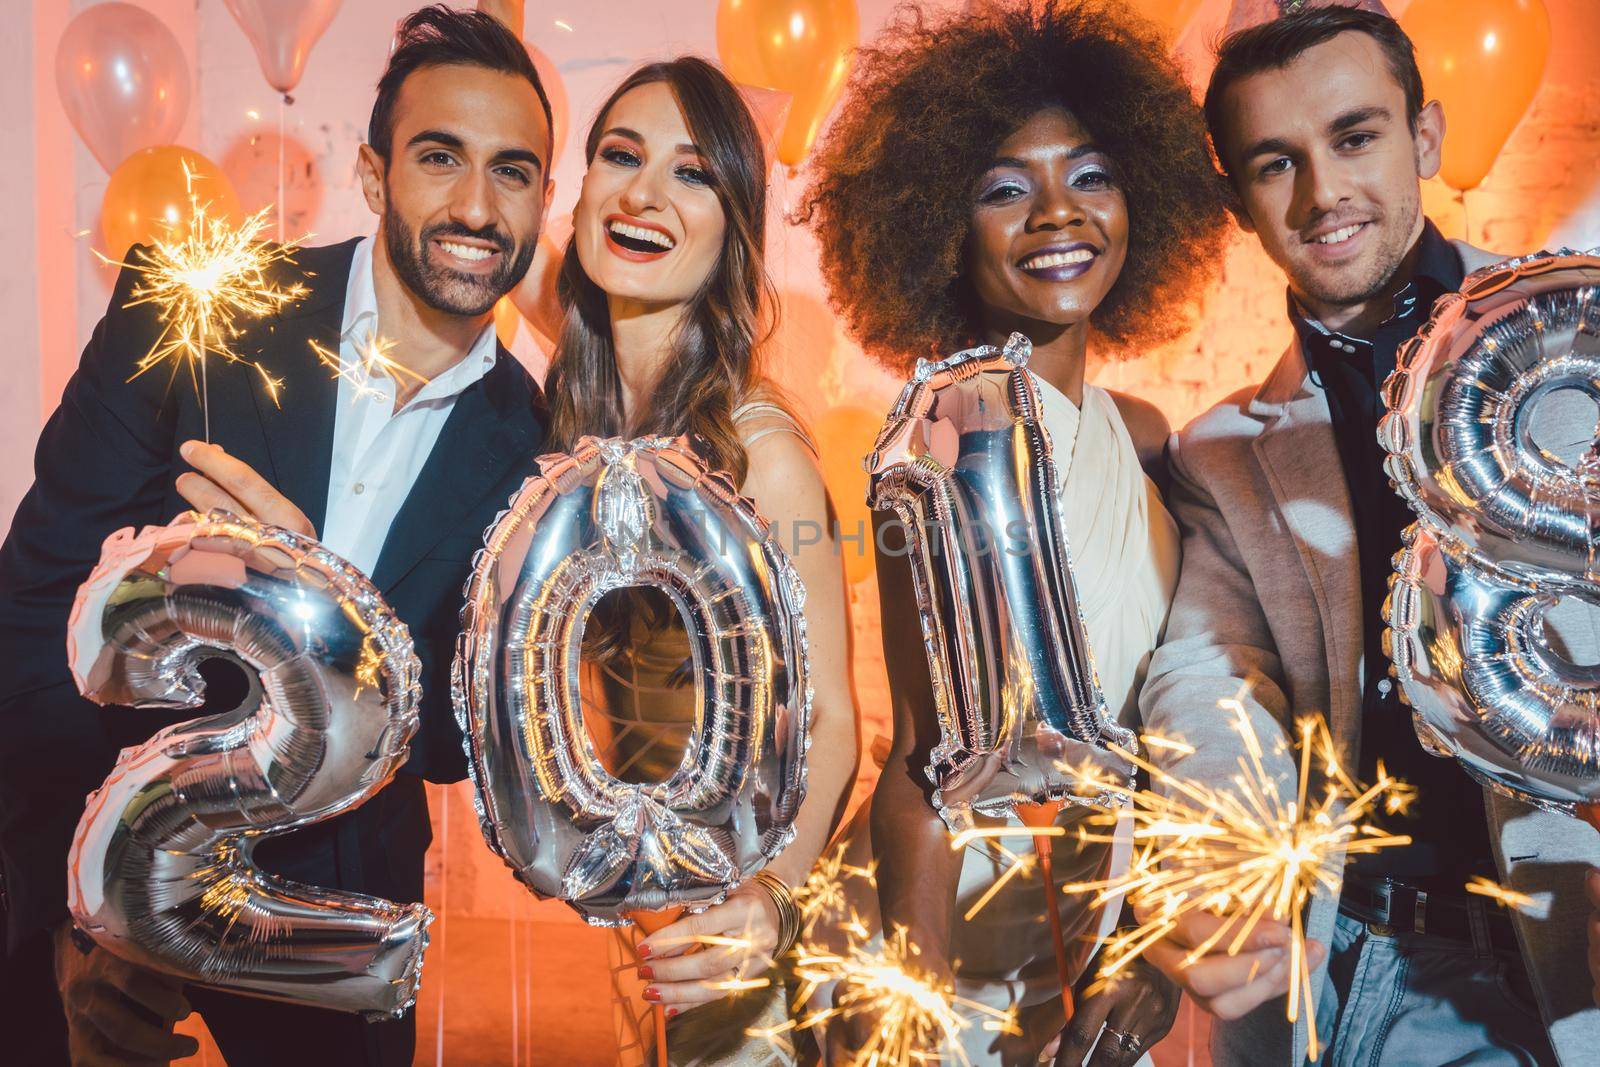 Group of party people celebrating the arrival of 2018, men and women looking into camera